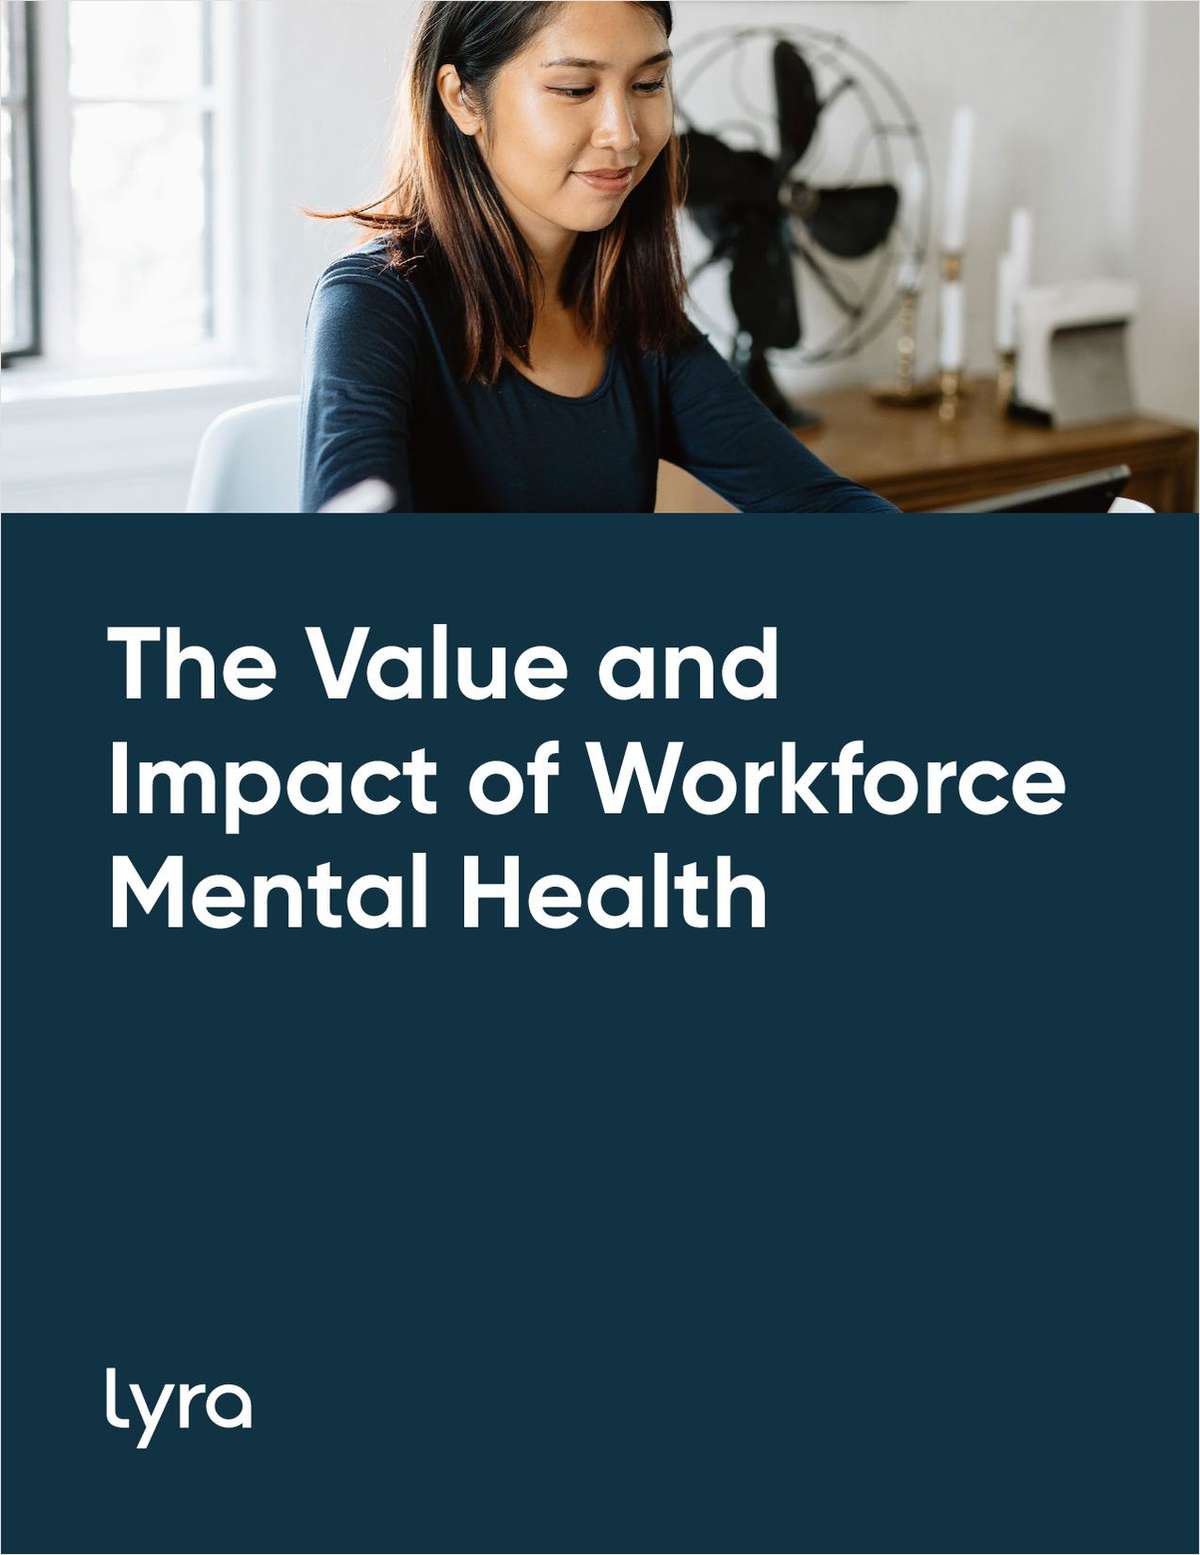 The Value and Impact of Workforce Mental Health